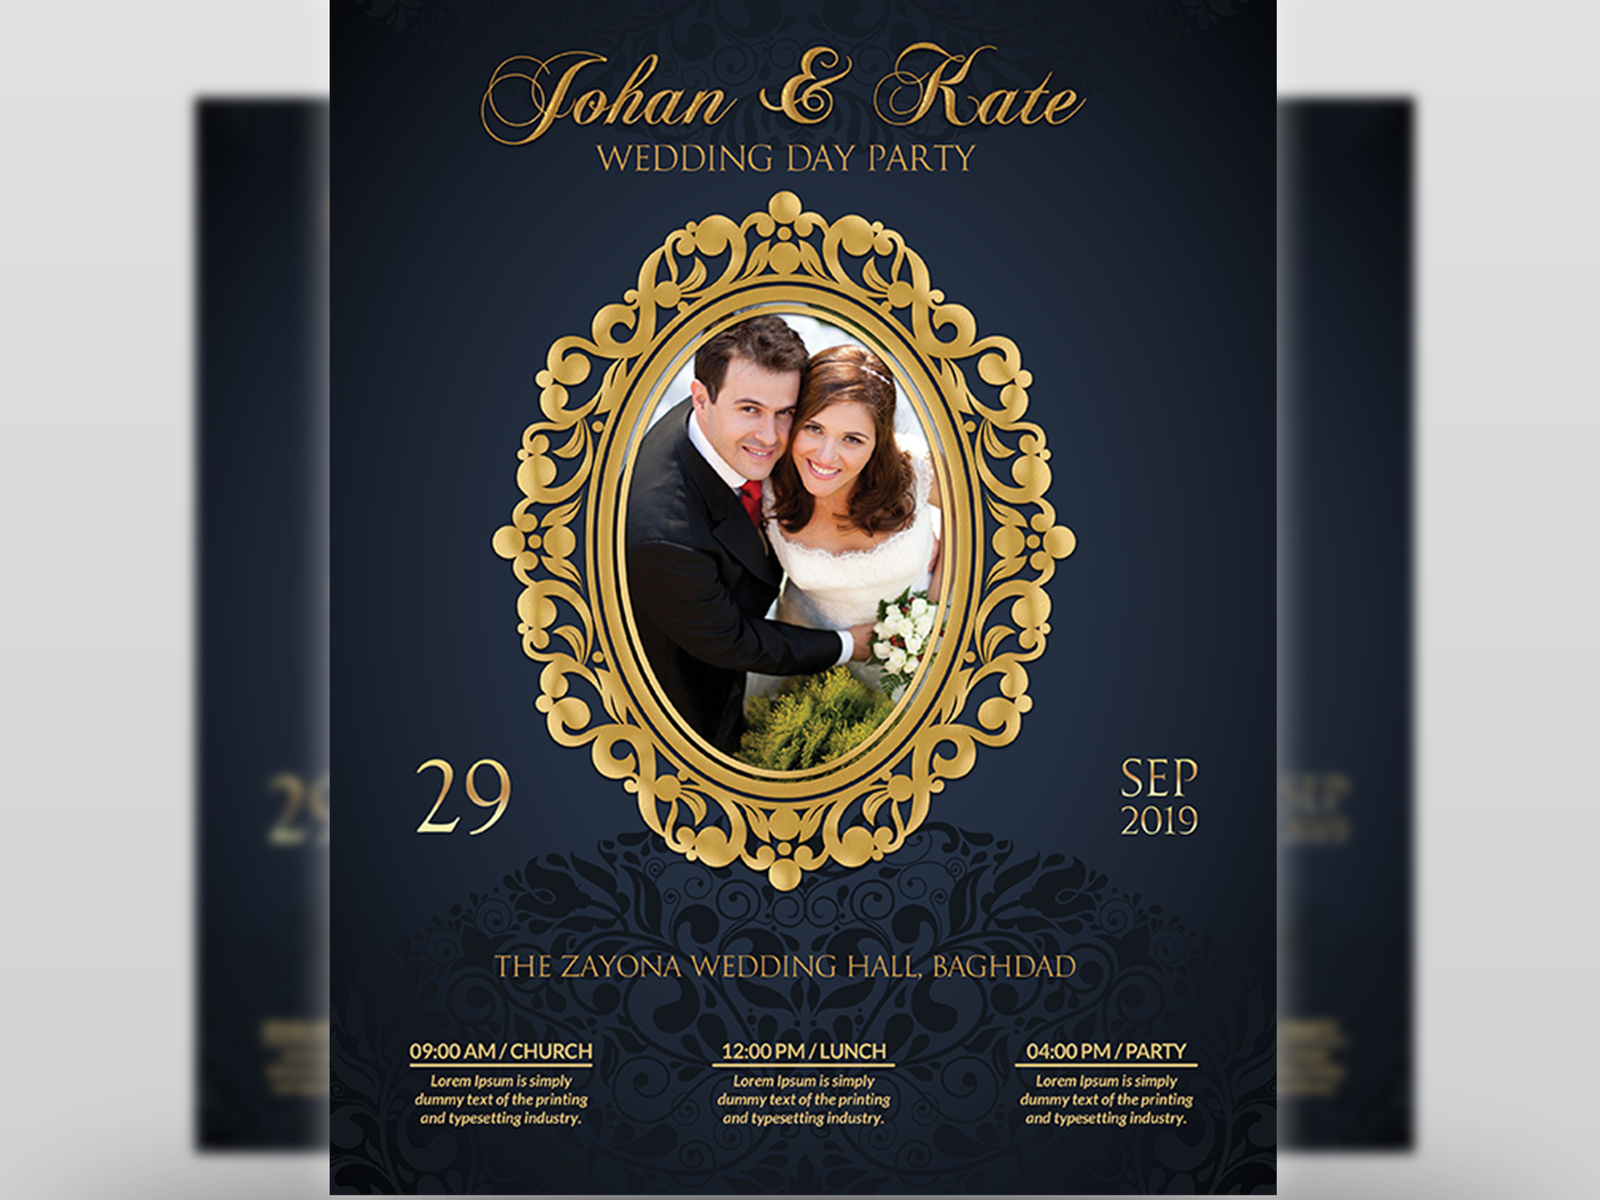 wedding-party-flyer-template-by-owpictures-on-dribbble